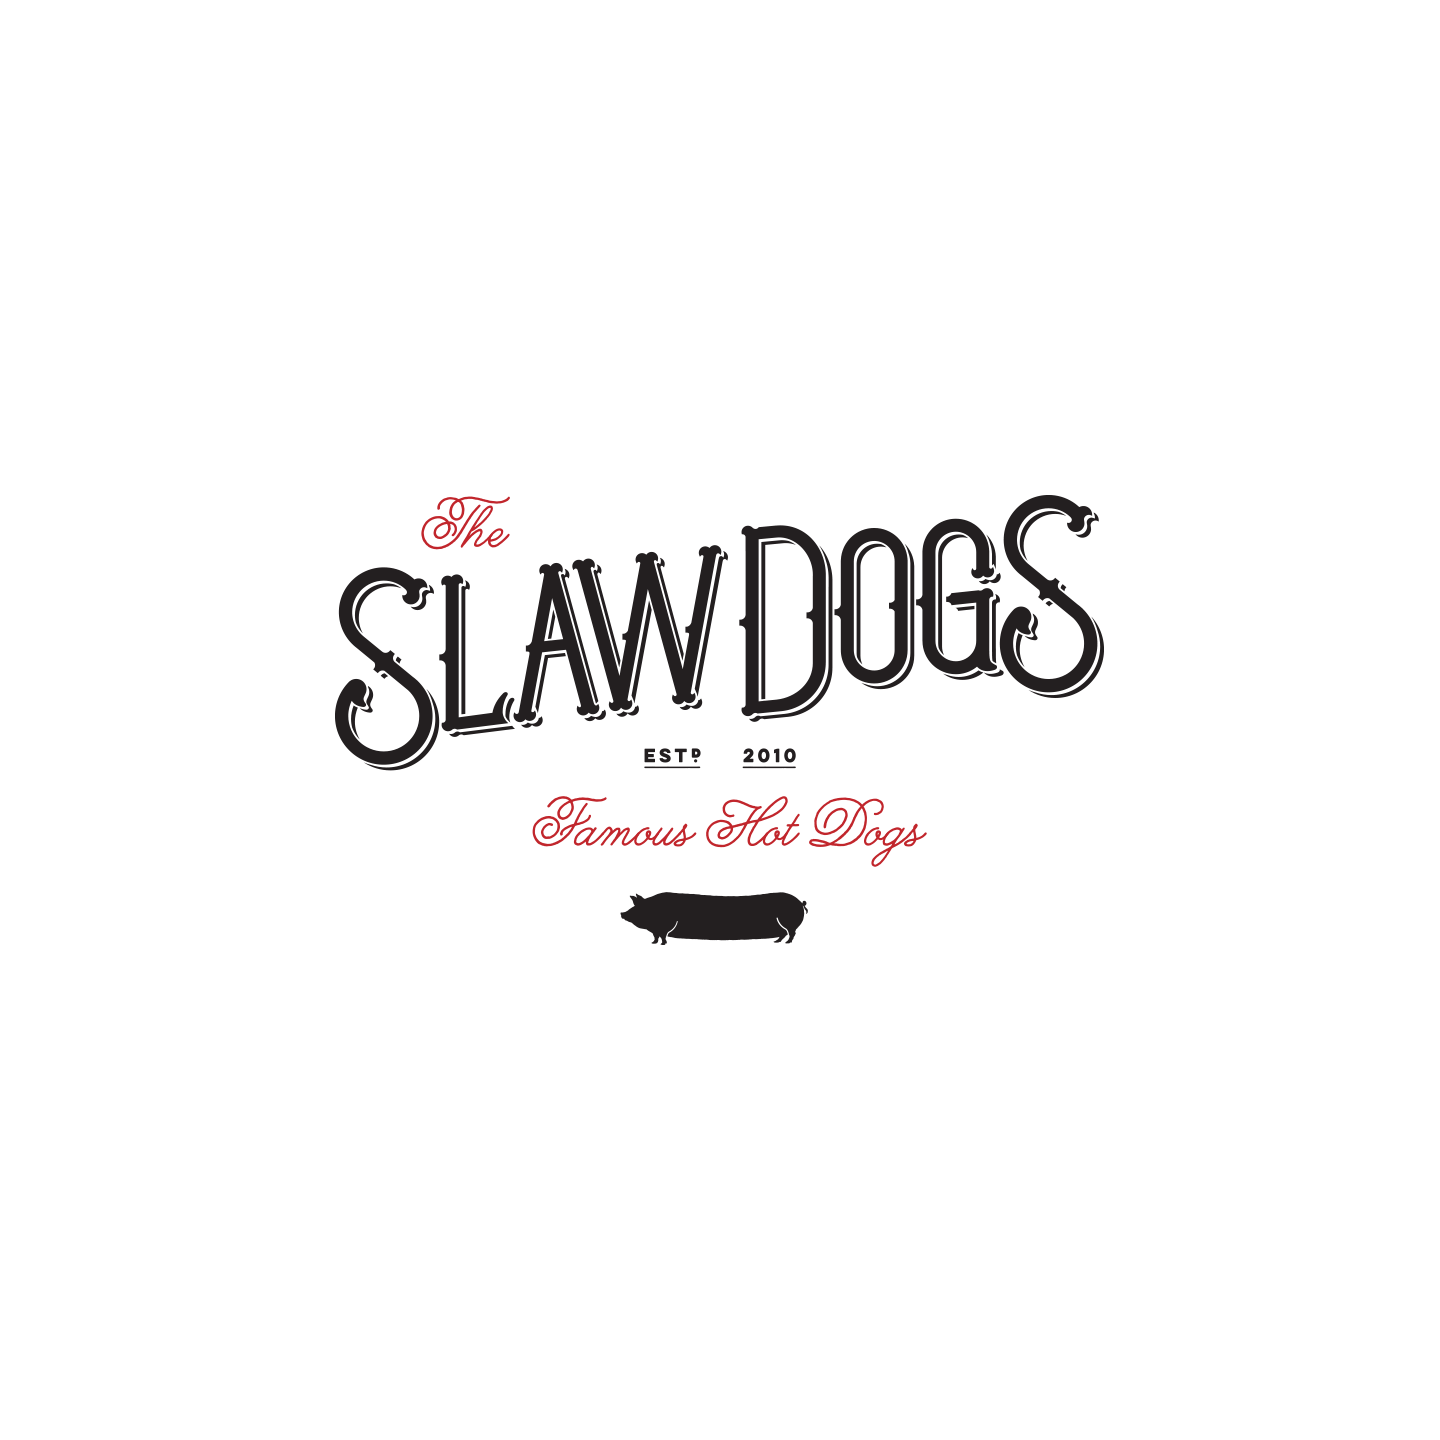 The Slaw Dogs